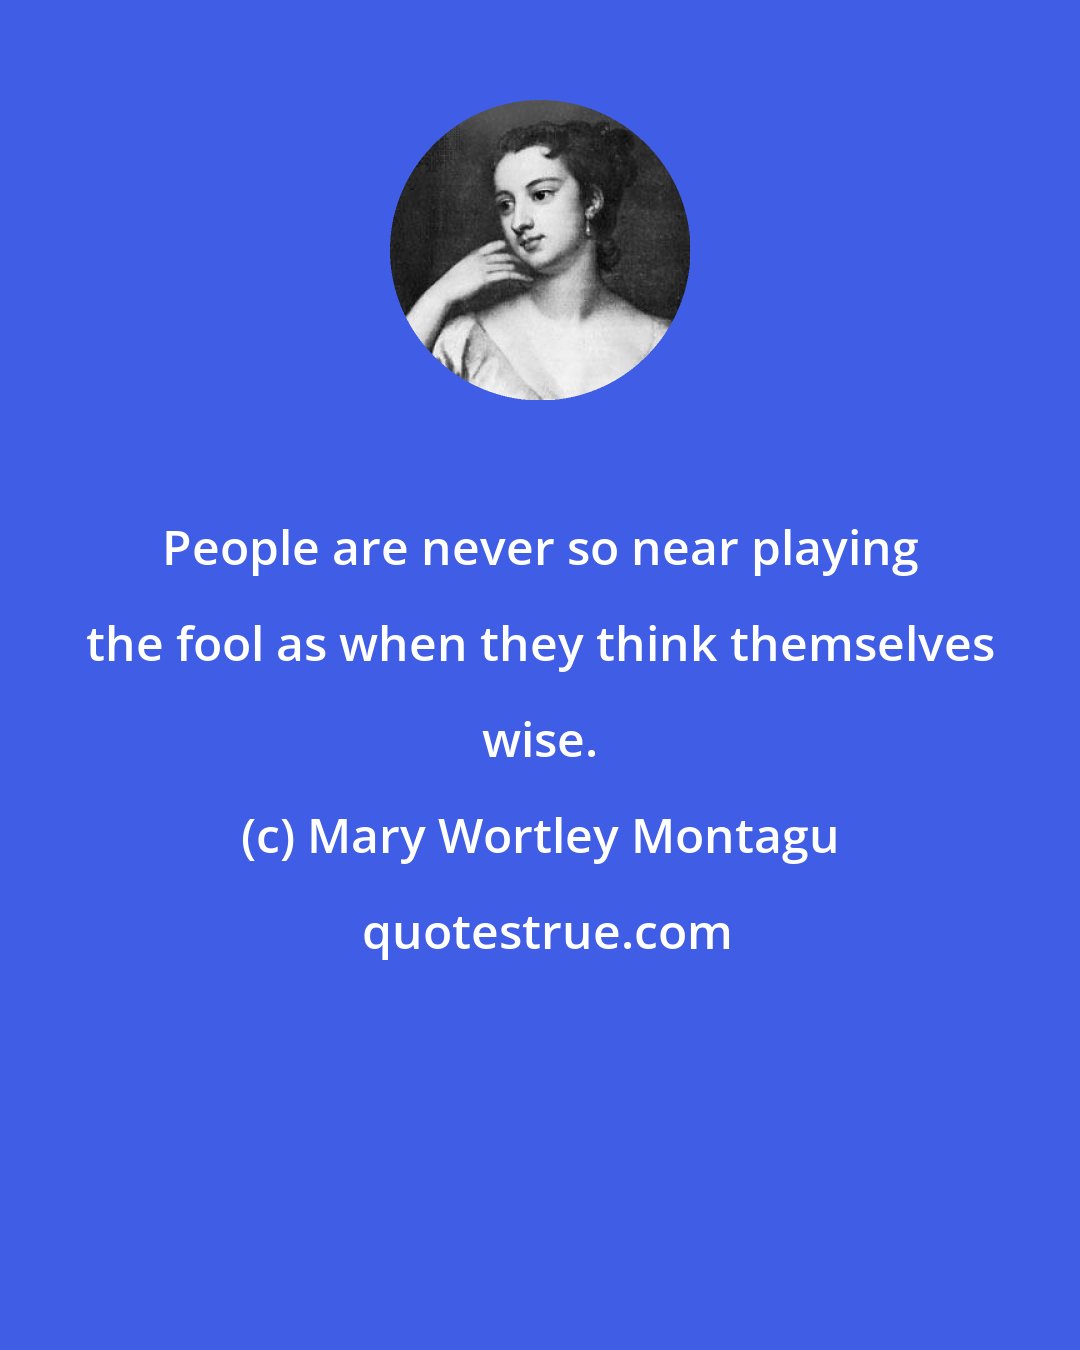 Mary Wortley Montagu: People are never so near playing the fool as when they think themselves wise.